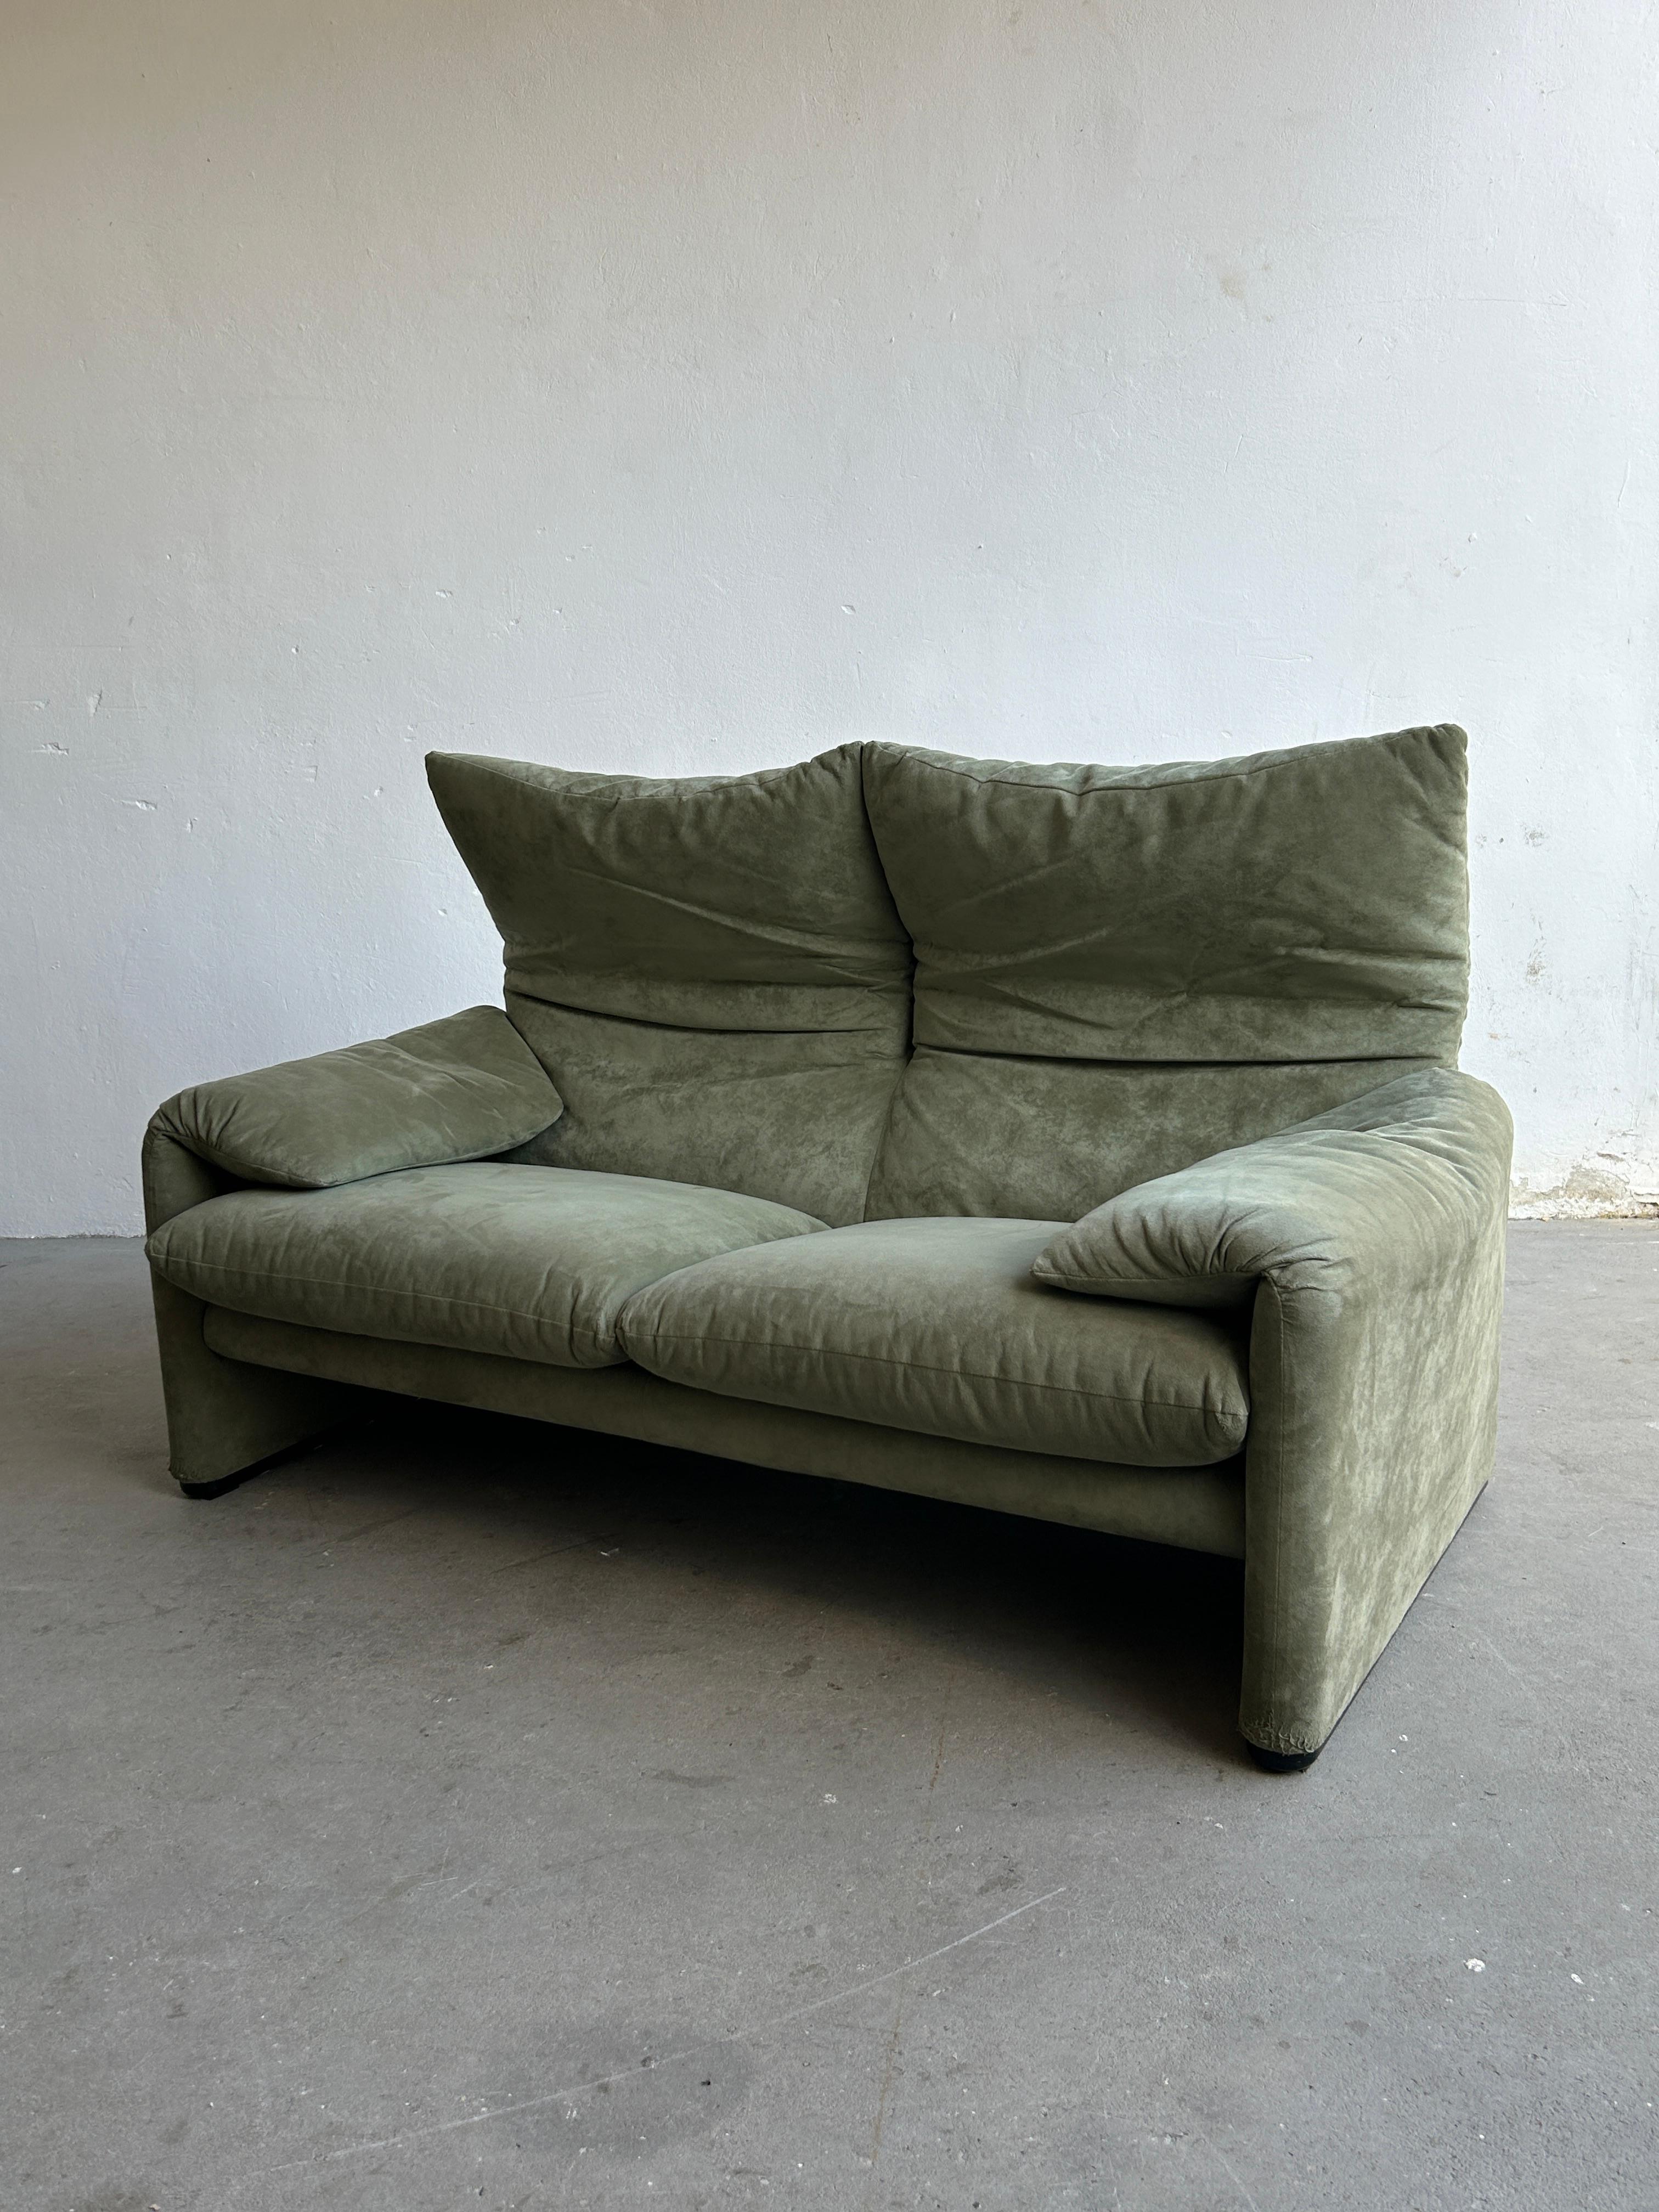 Vintage 'Maralunga' Two-Seater Sofa by Vico Magistretti for Cassina 2